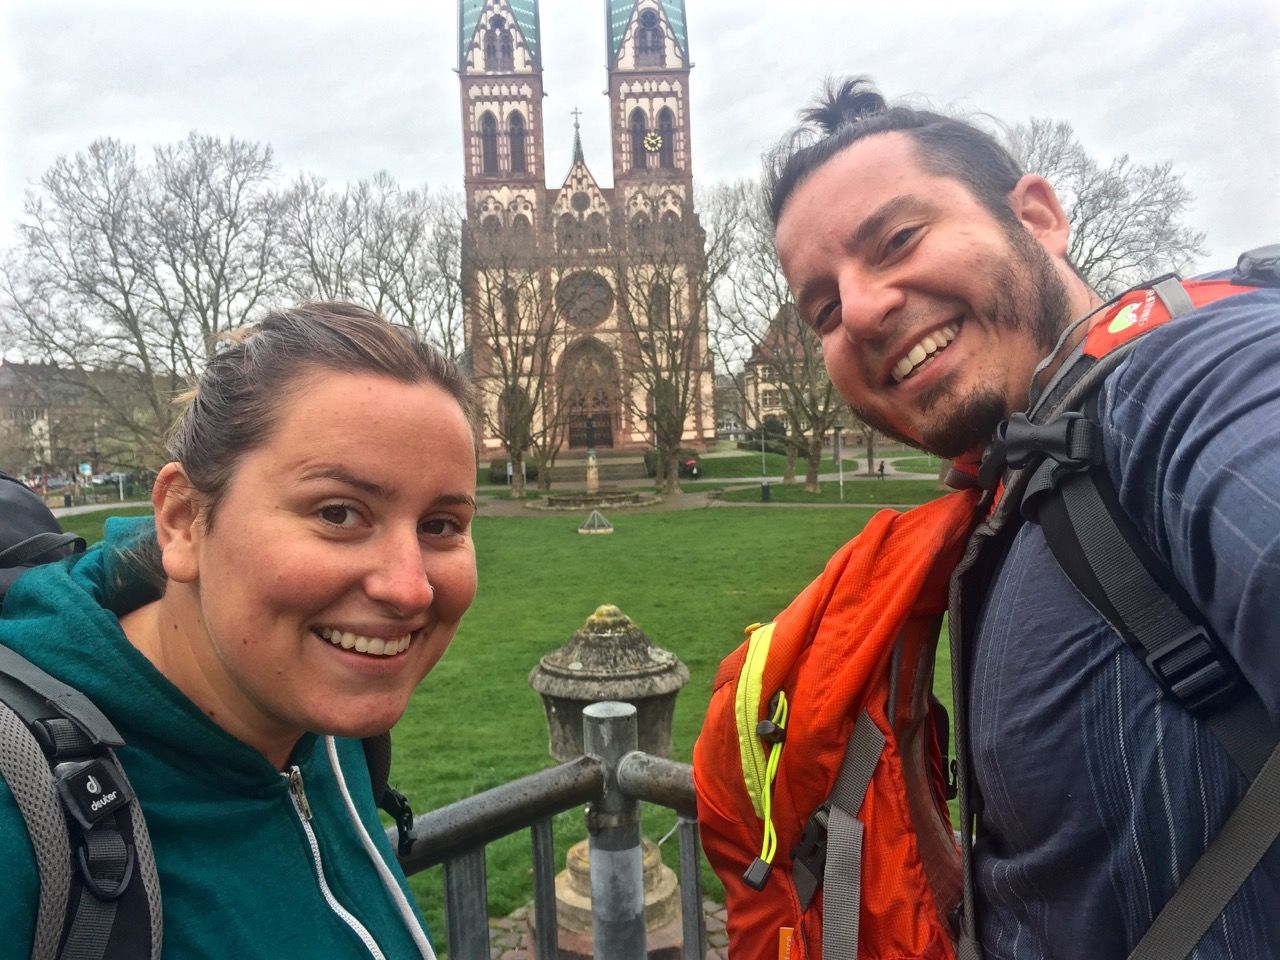 Two people smiling at the camera with a church in the background.